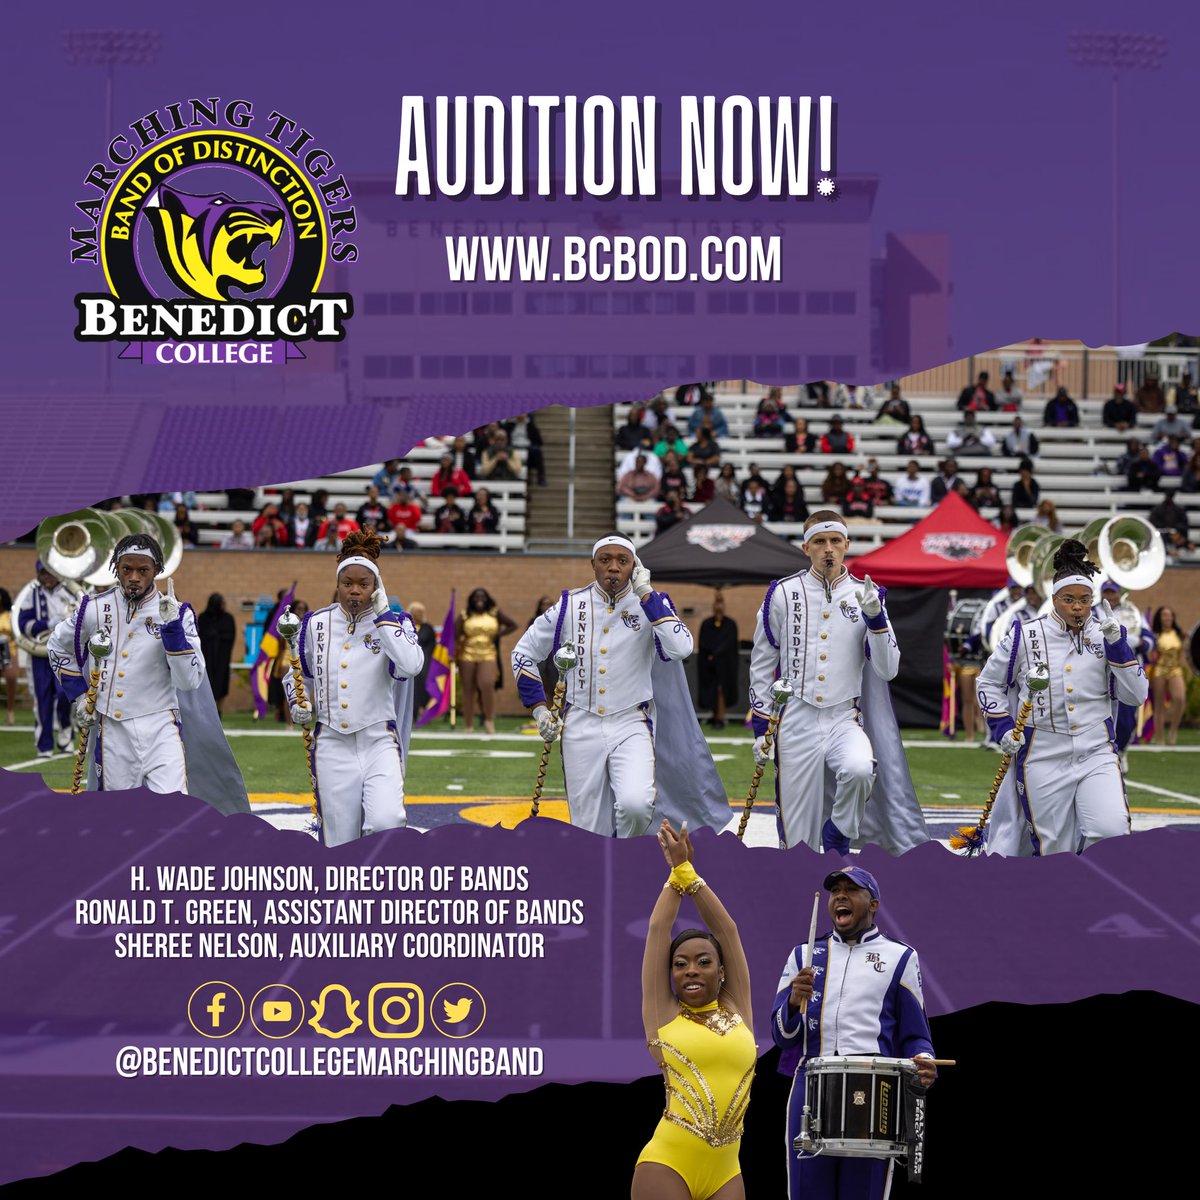 High School Seniors! The 2023 BCBOD Auditions are Now Open! Visit bcbod.com to schedule yours today!